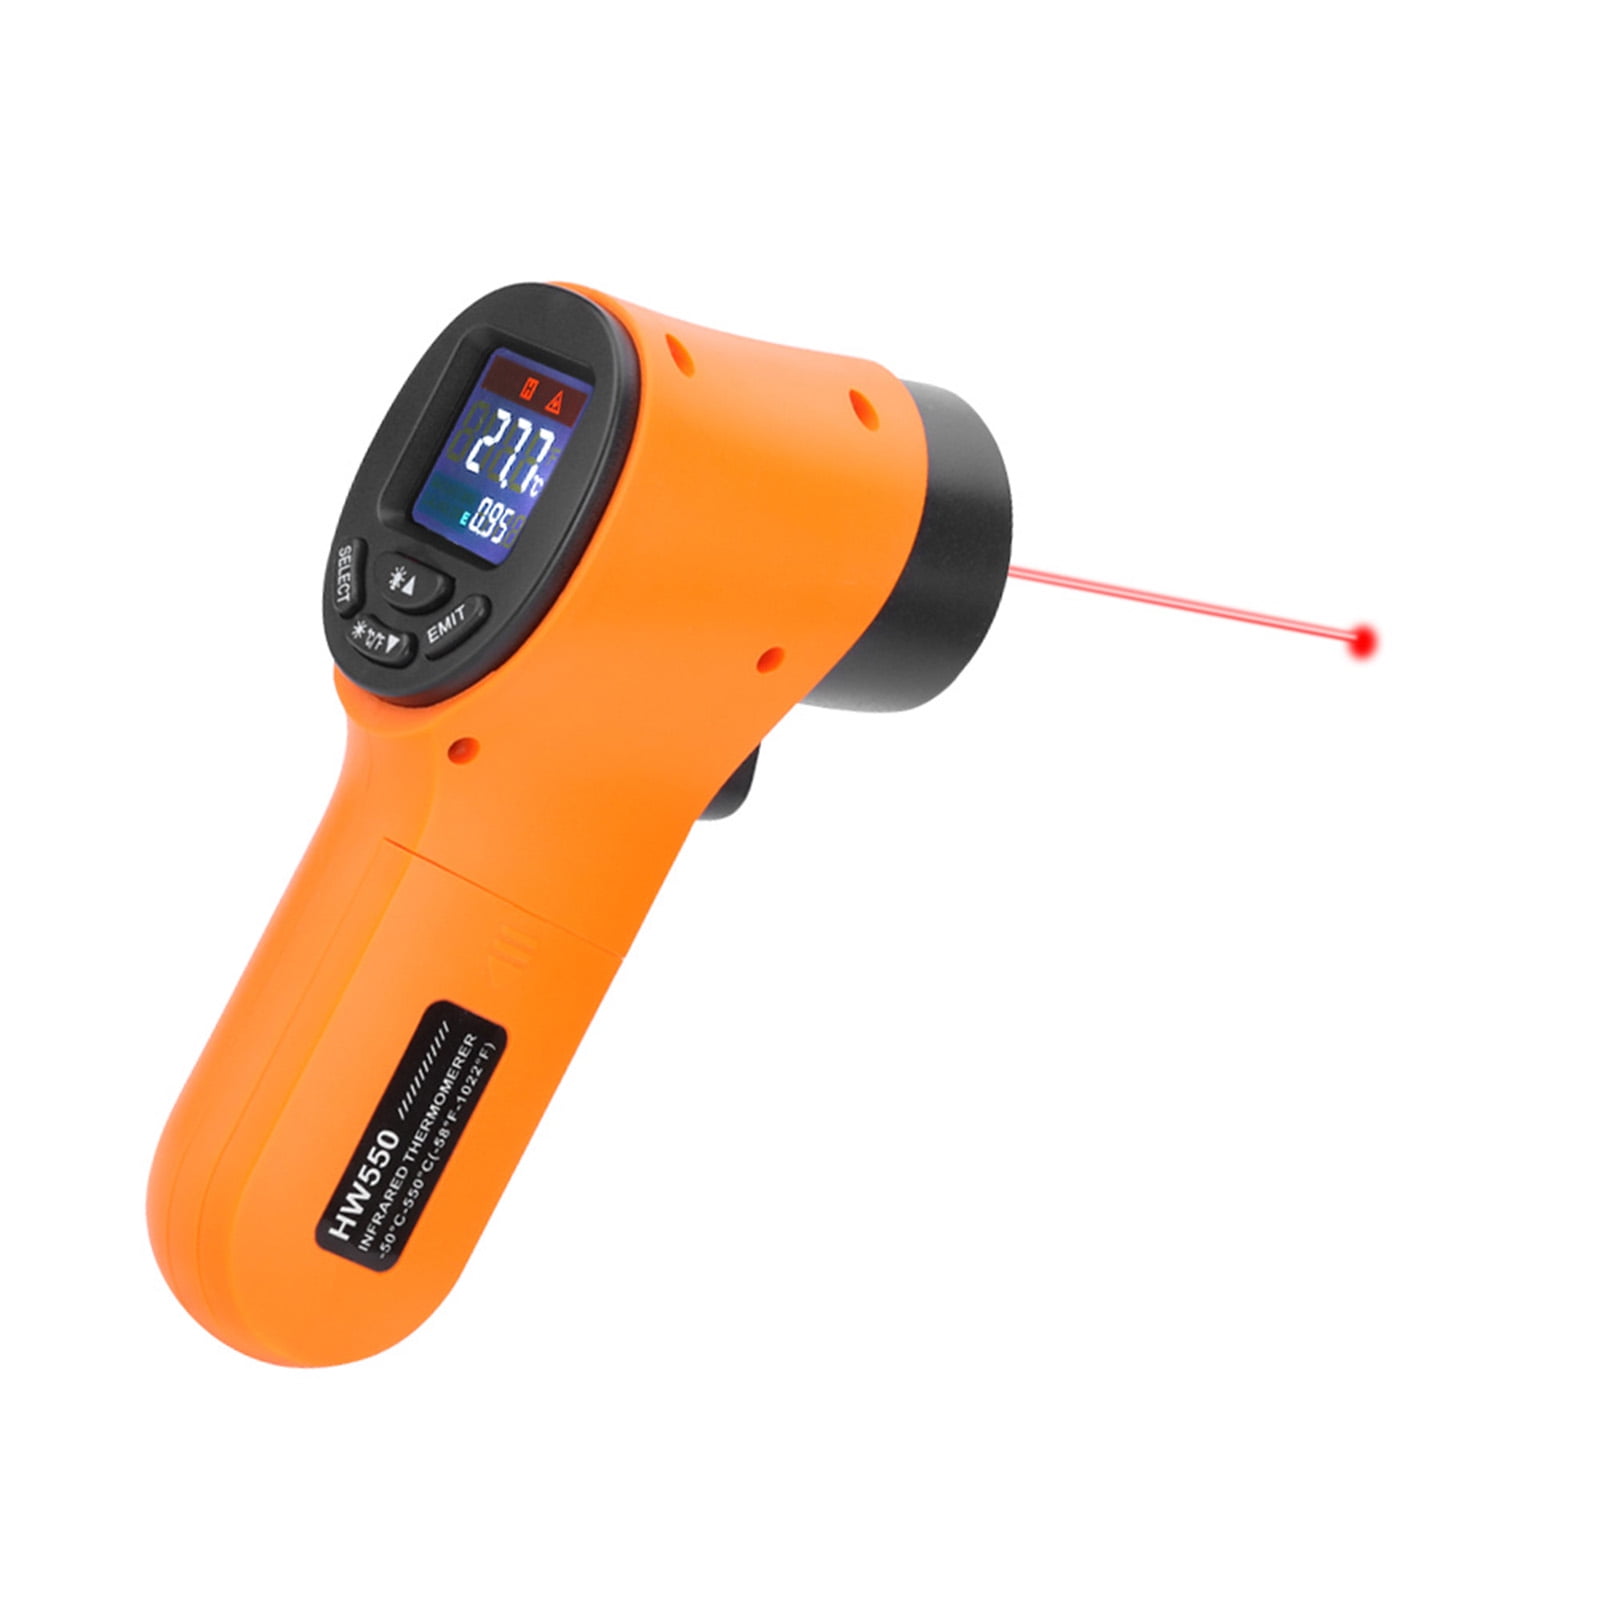 Inrared Thermometer handheld temperature gun for checking engine  temperature – Early Ford Parts